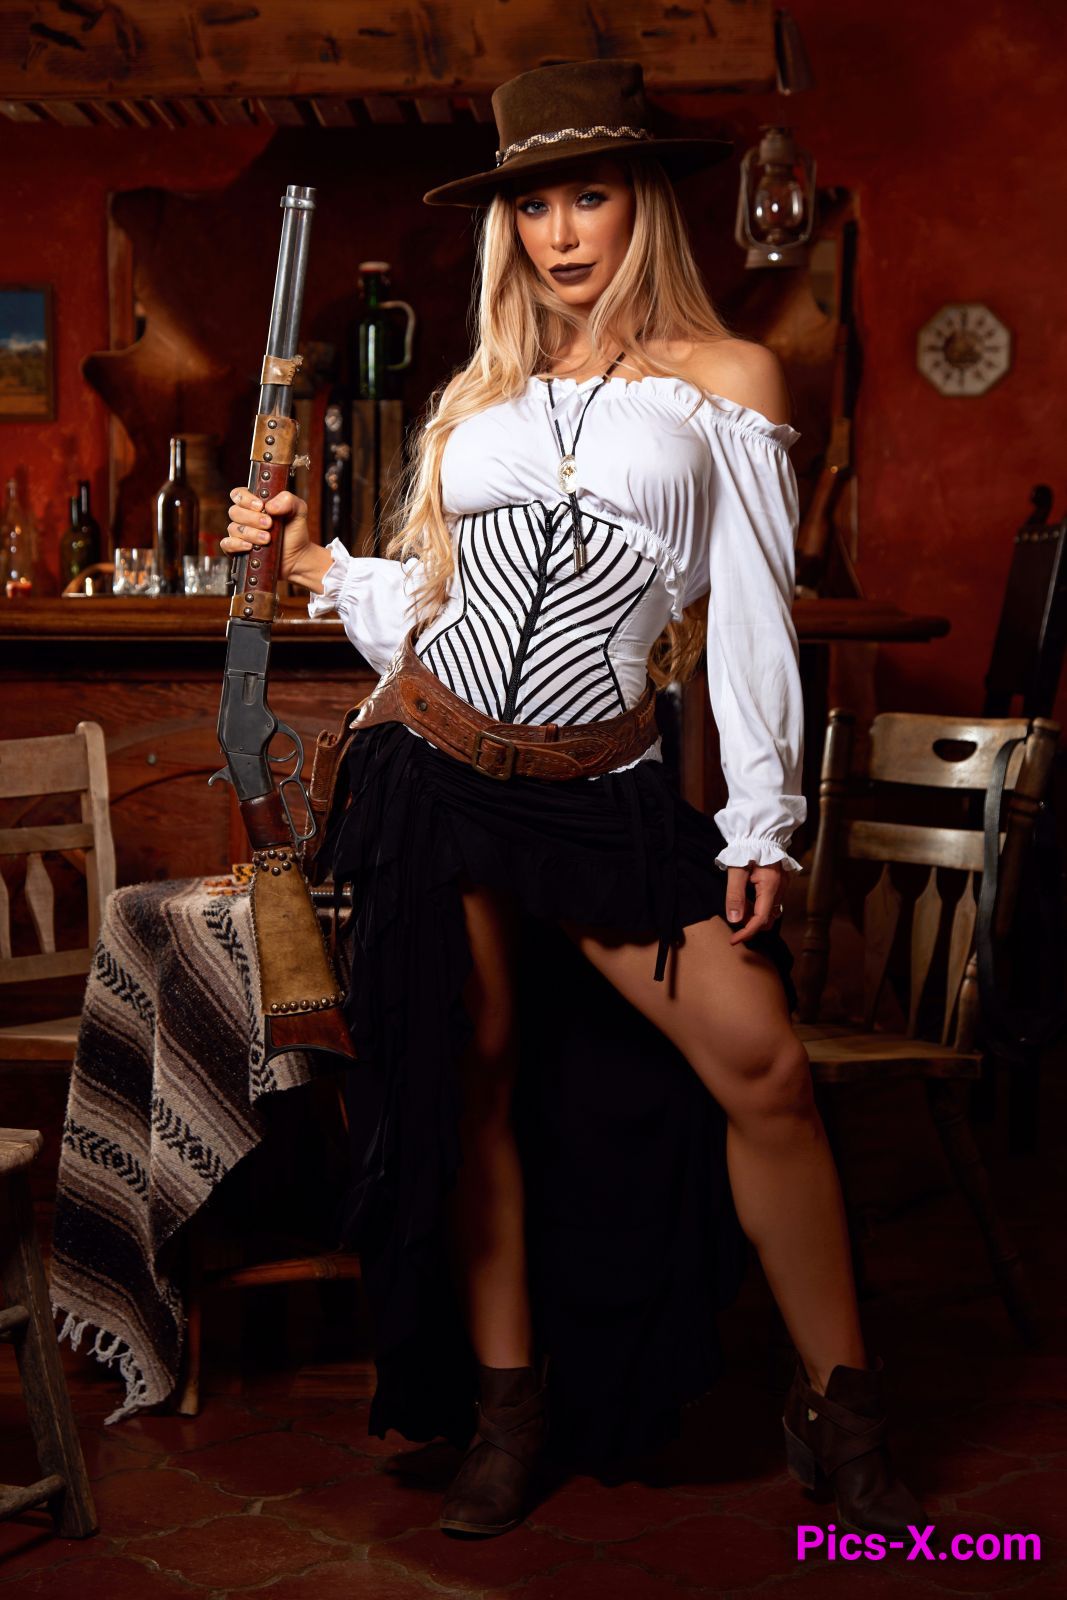 American Cowgirl - Image 5